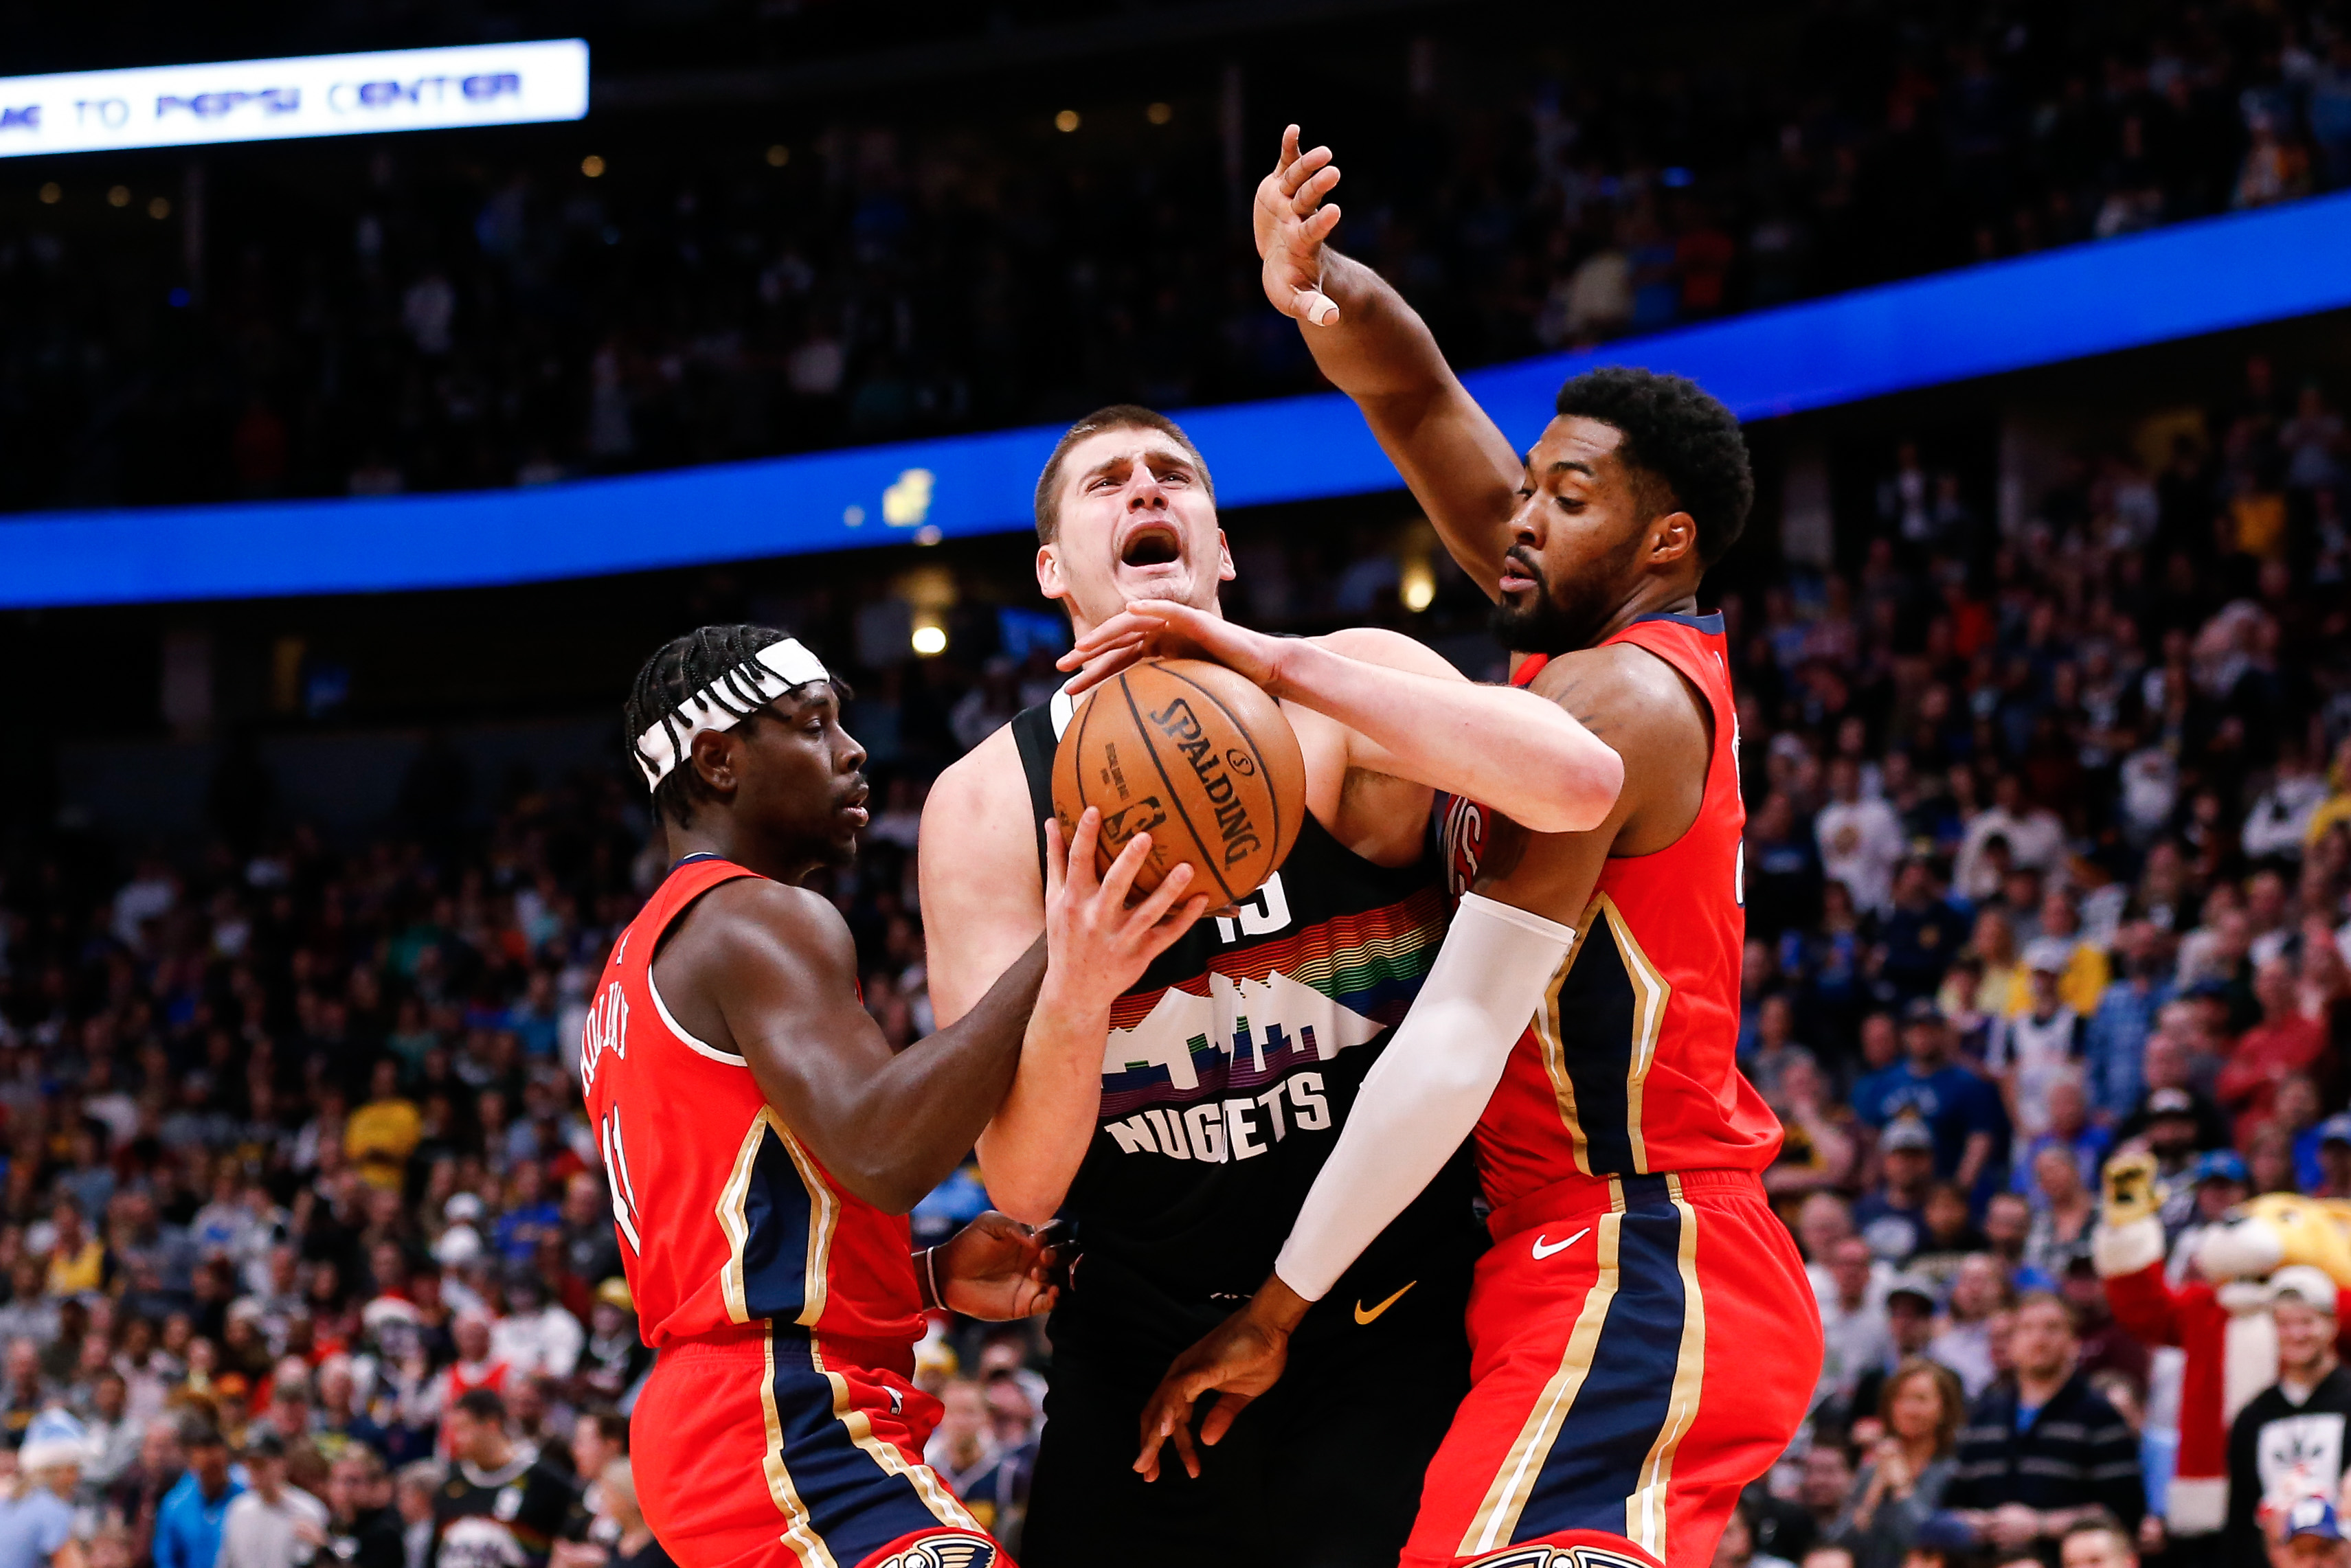 Denver Nuggets center Nikola Jokic (15) is fouled by New Orleans Pelicans guard Jrue Holiday (11) and forward Derrick Favors (22) in the first quarter at the Pepsi Center.